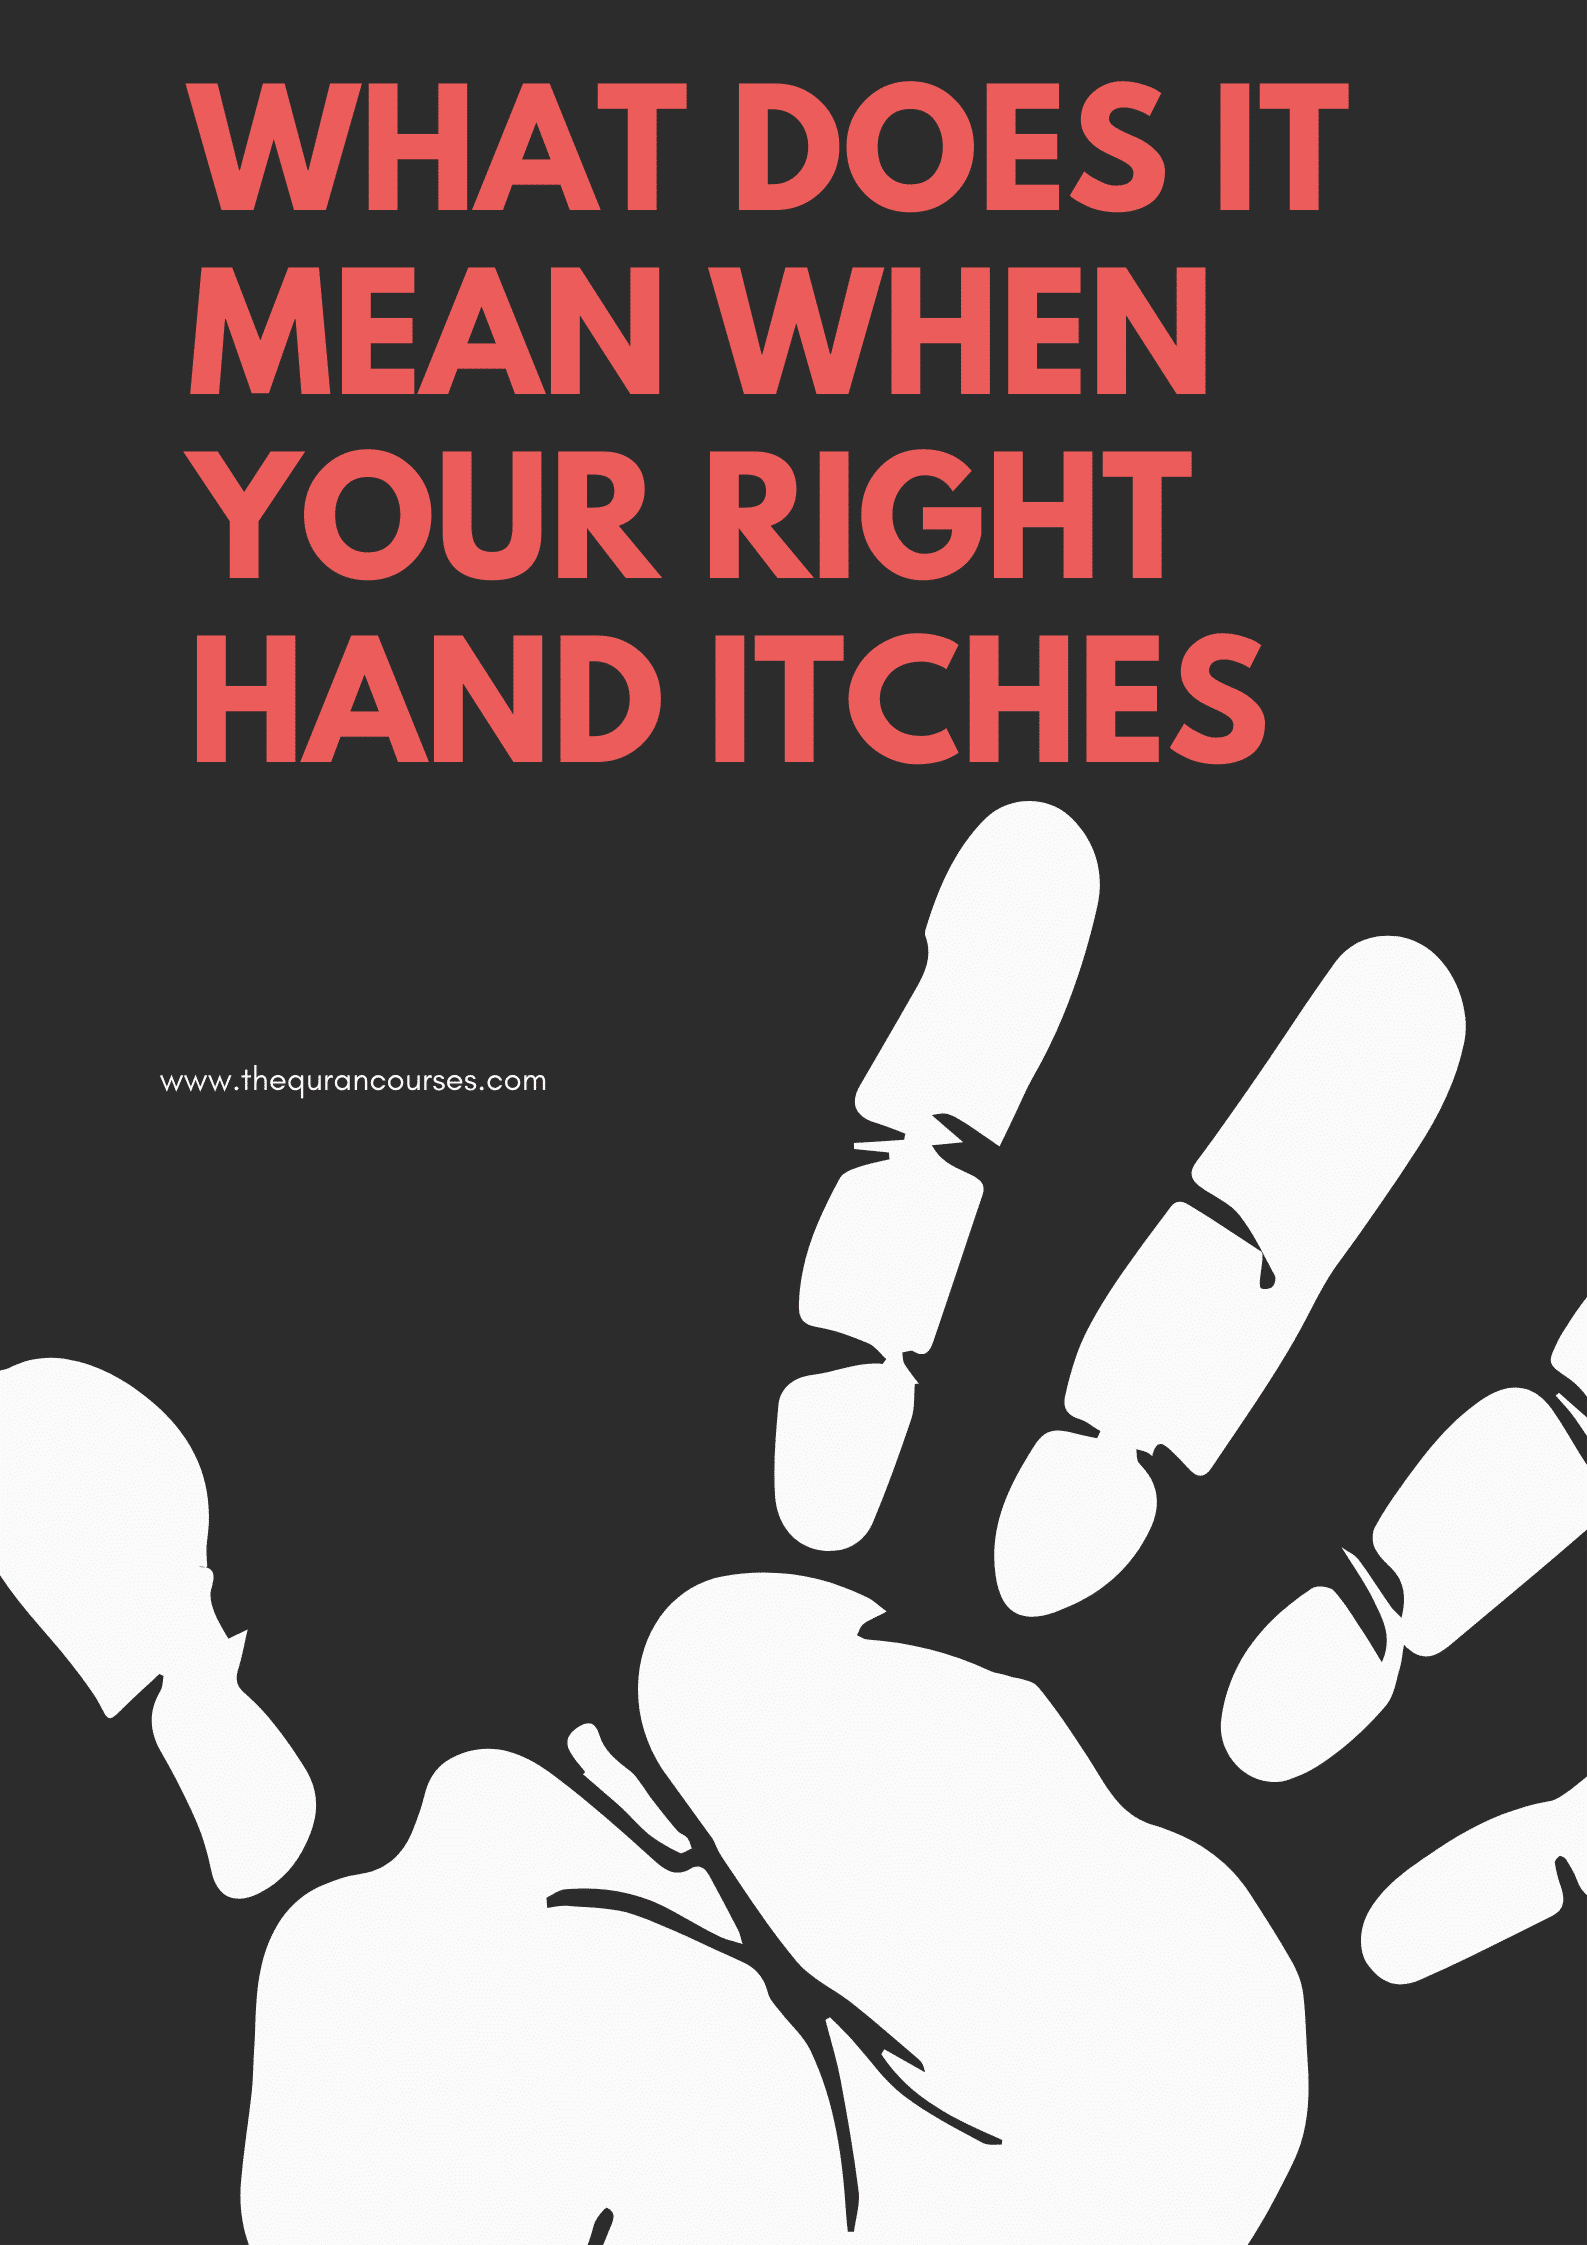 What does it mean when your right hand itches